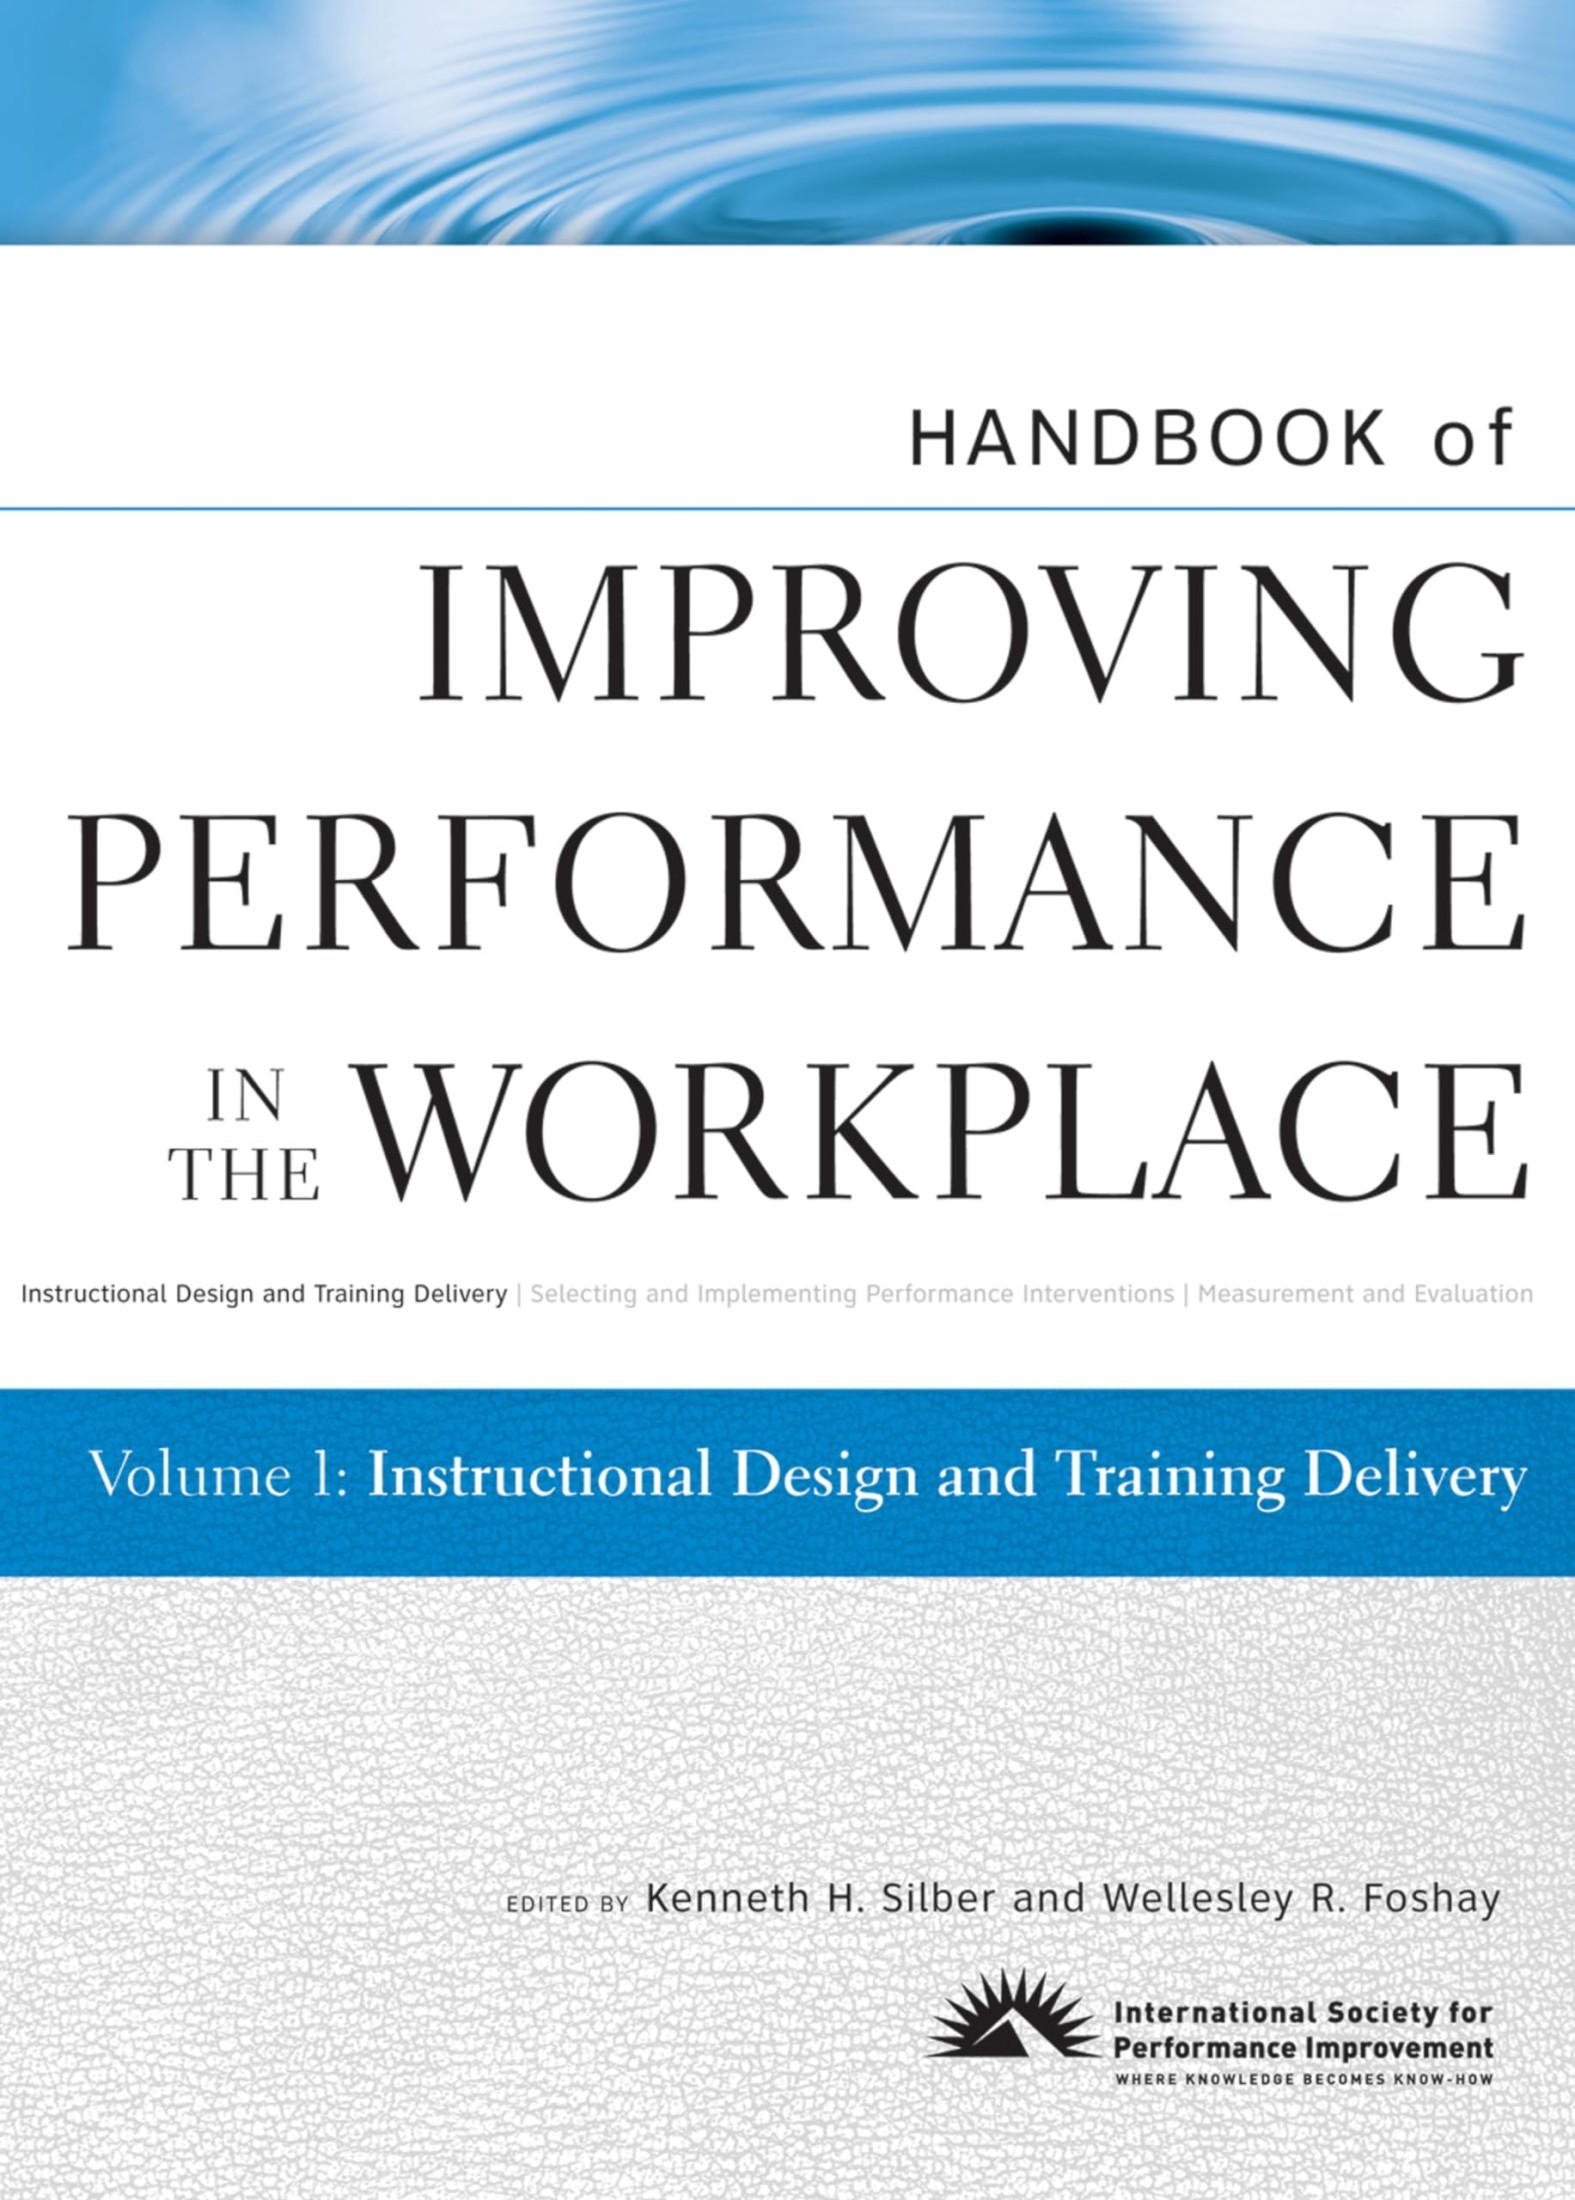 Handbook of Improving Performance in the Workplace, Instructional Design and Training Delivery (Volumes 1-3)